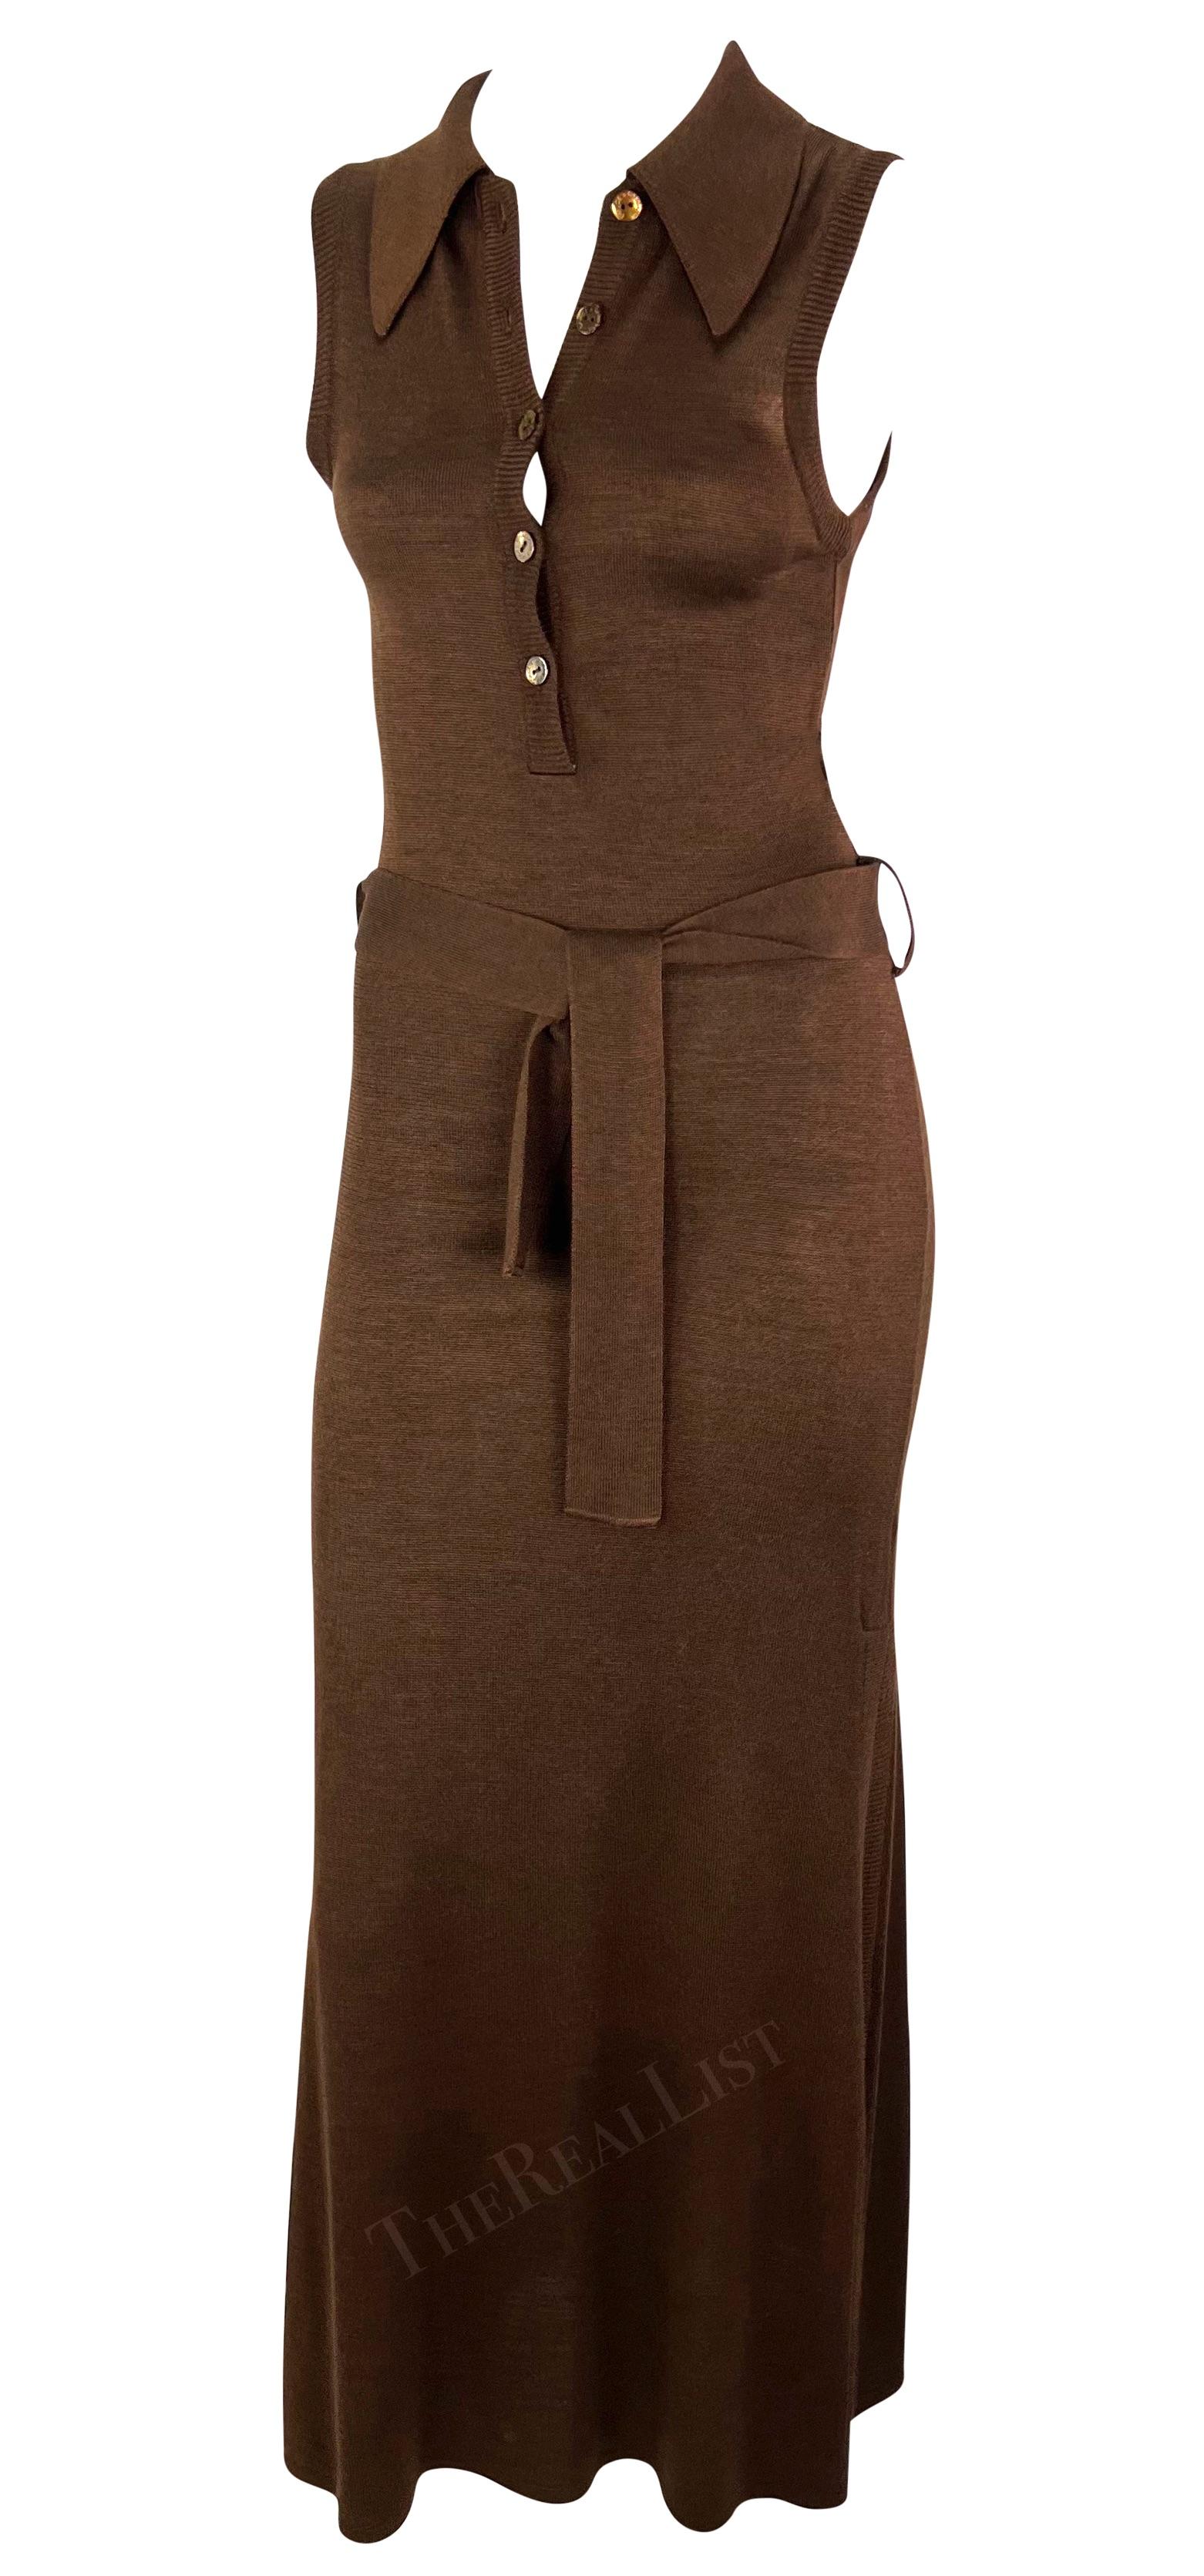 Women's S/S 1996 Dolce & Gabbana Runway Brown Knit Bodycon Belted Maxi Collared Dress For Sale